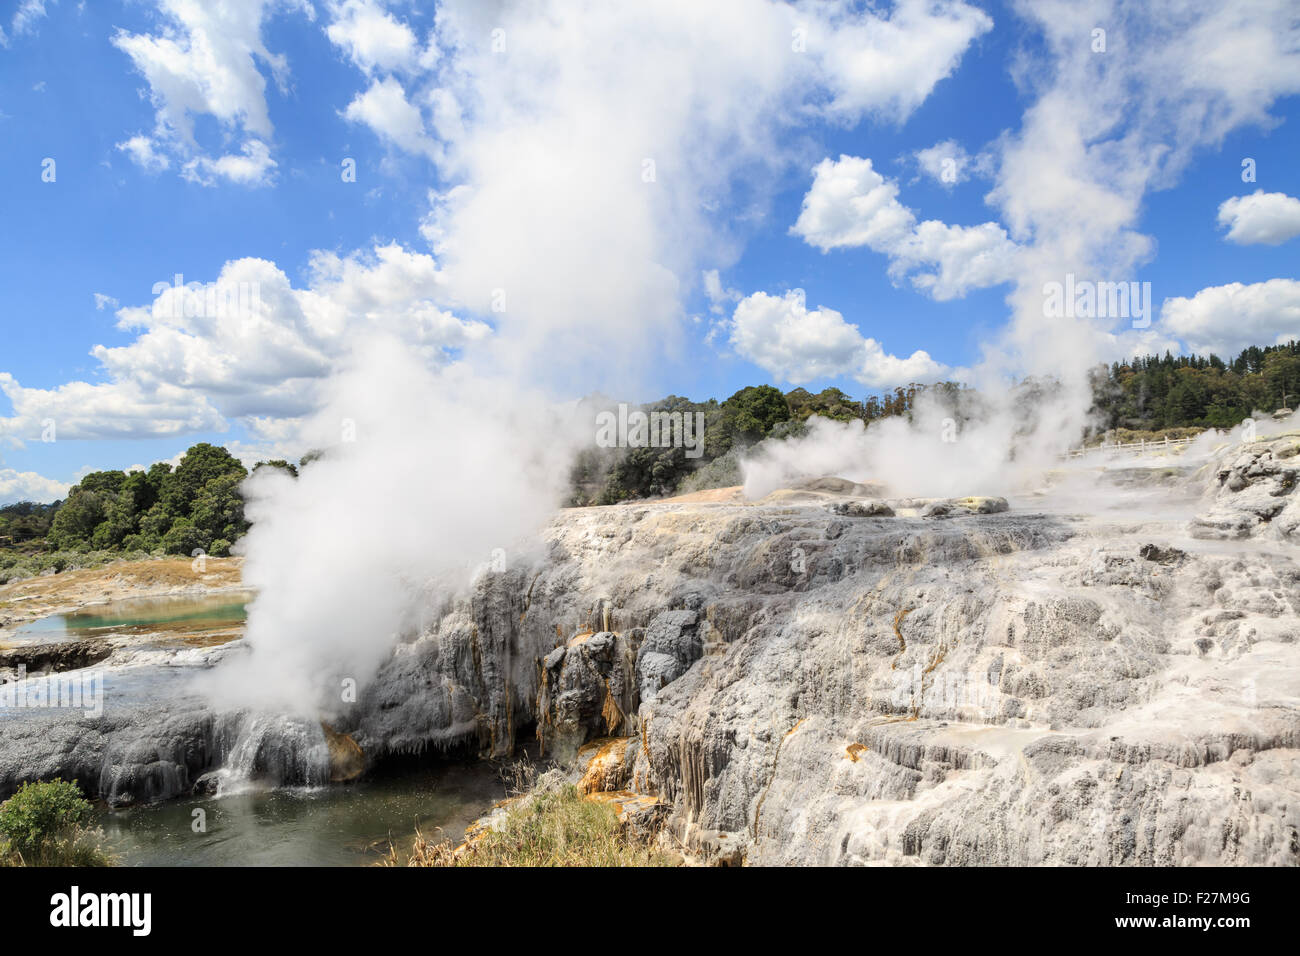 Hot sources and geysirs steaming in Te Puia a park with geothermal activity near Rotorua, New Zealand Stock Photo